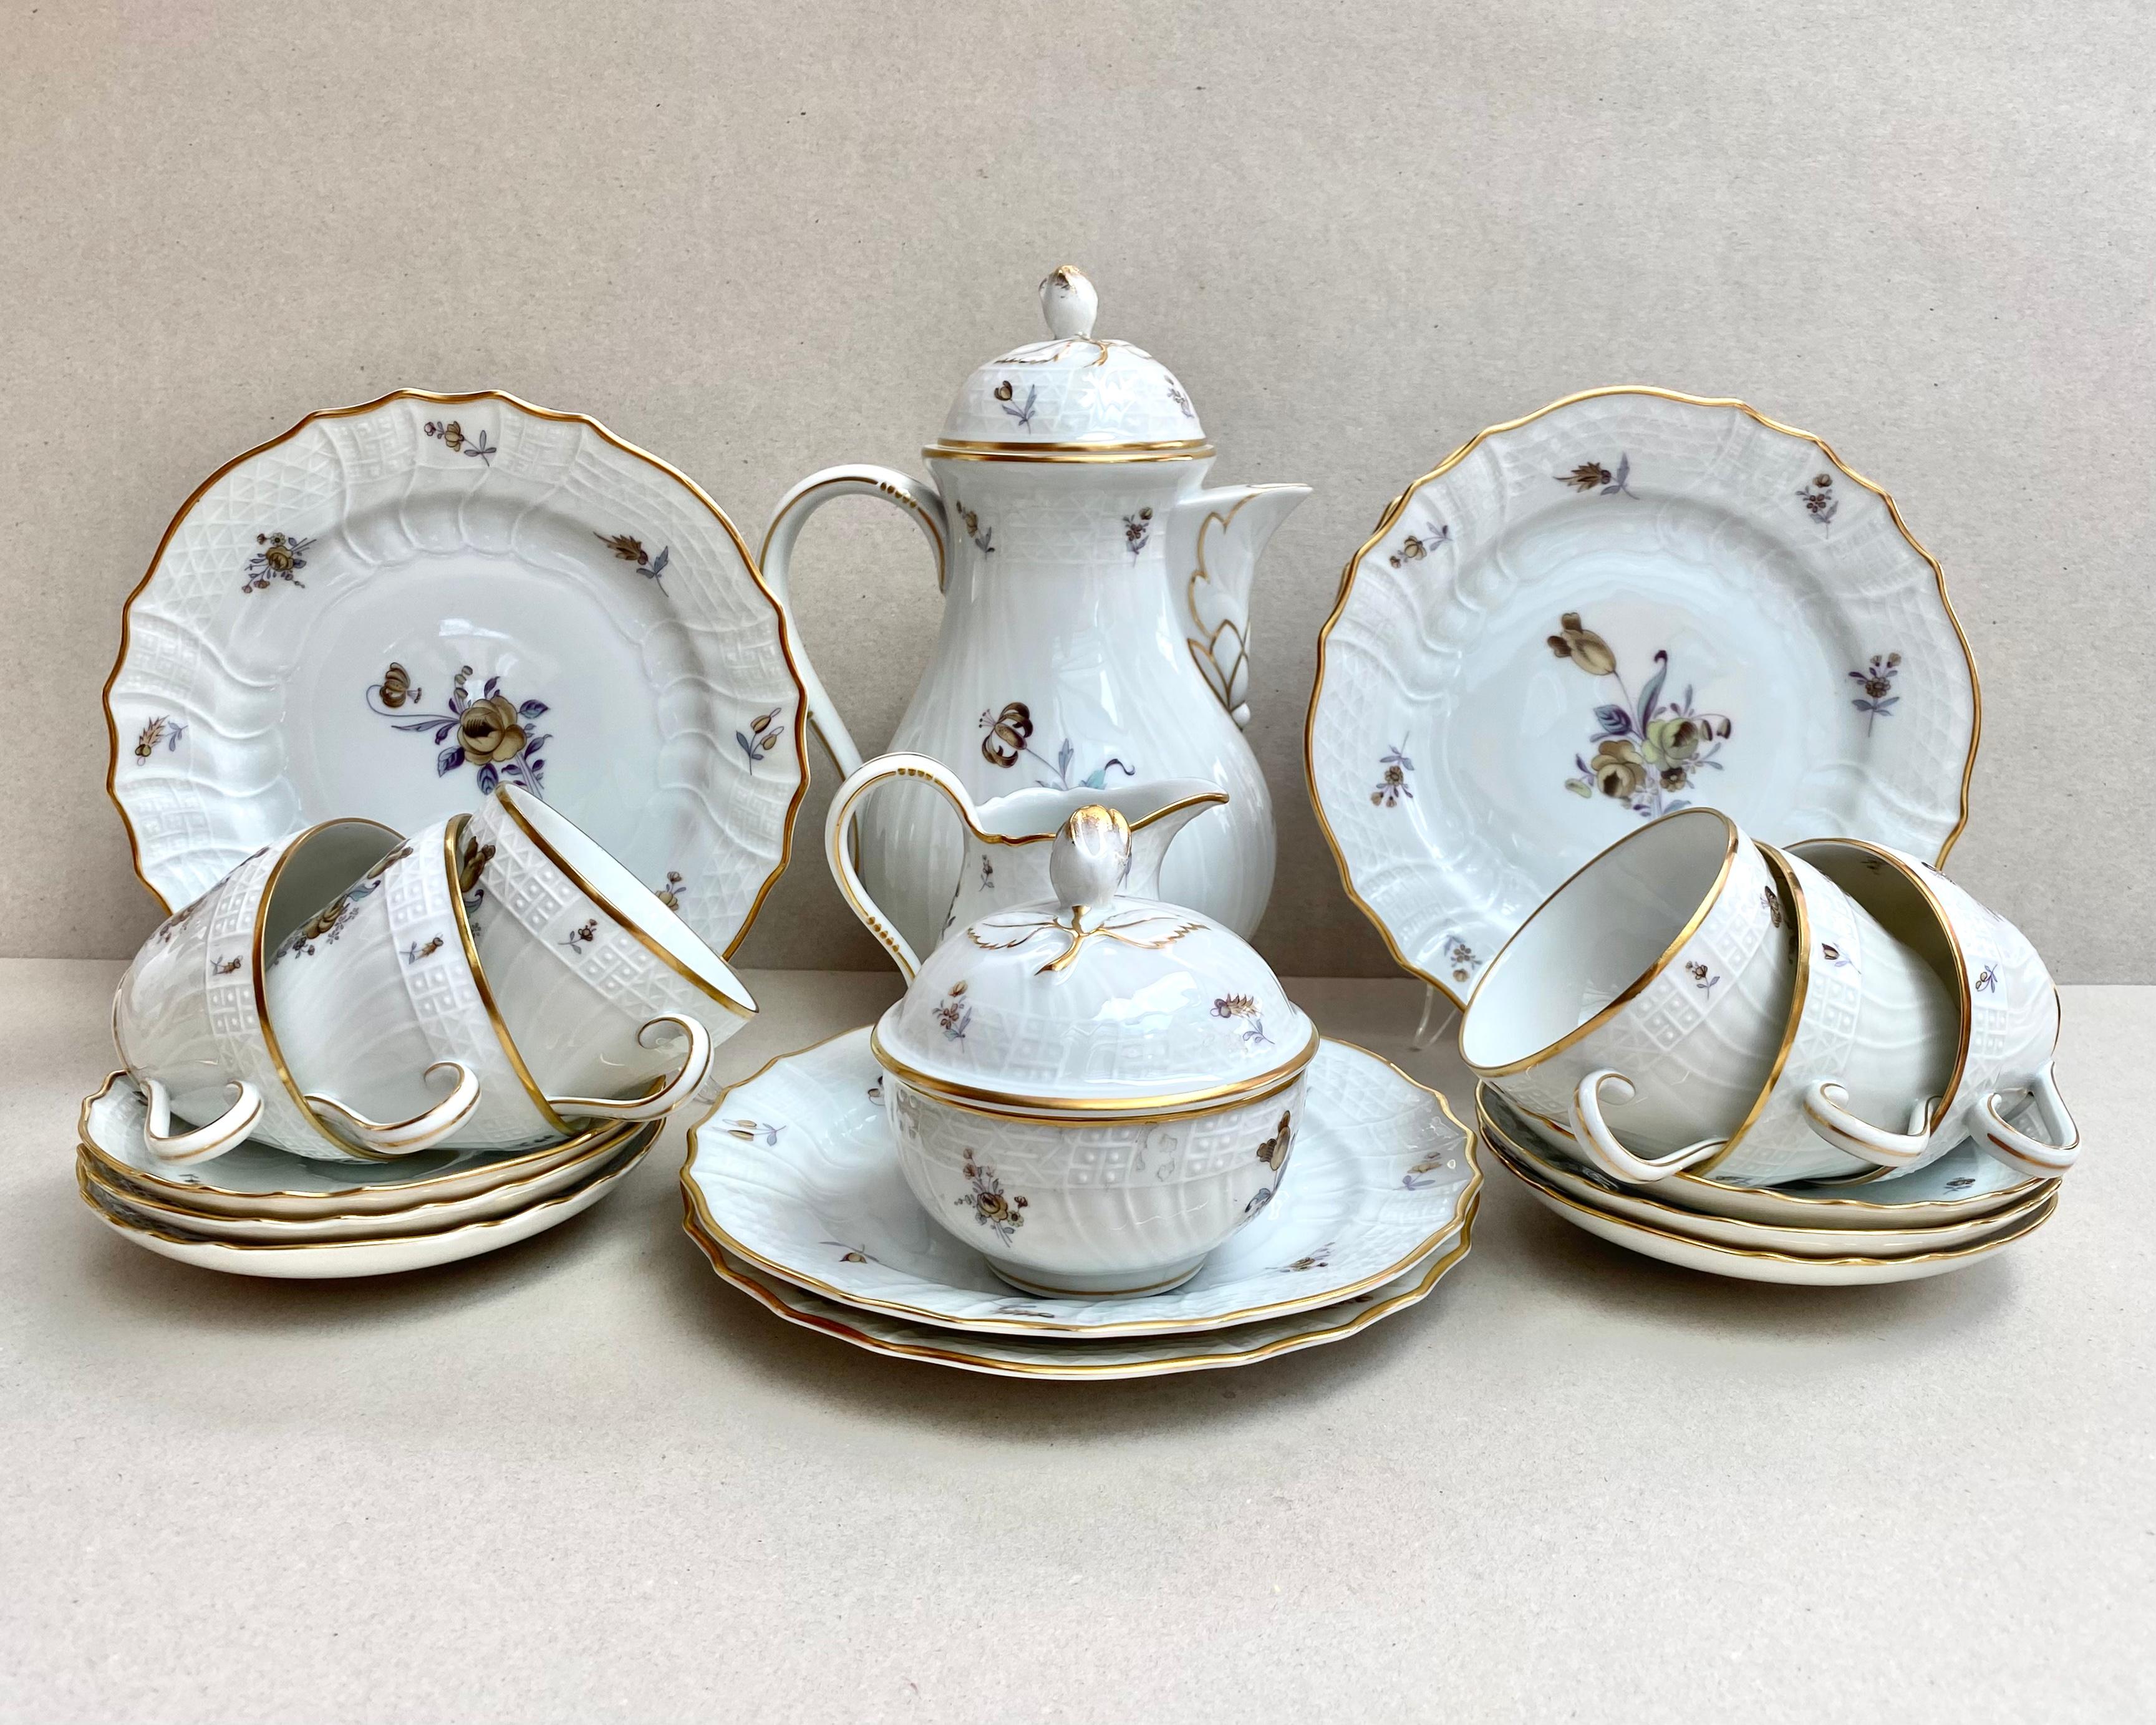 Magnificent bone china from the renowned oldest German manufactory Hutschenreuther Selb.

Collection “Dresden”. 

Stamp of the 1950s, number on each item. 

Unfortunately, neither photos nor videos convey its beauty. 

It is beautiful - noble